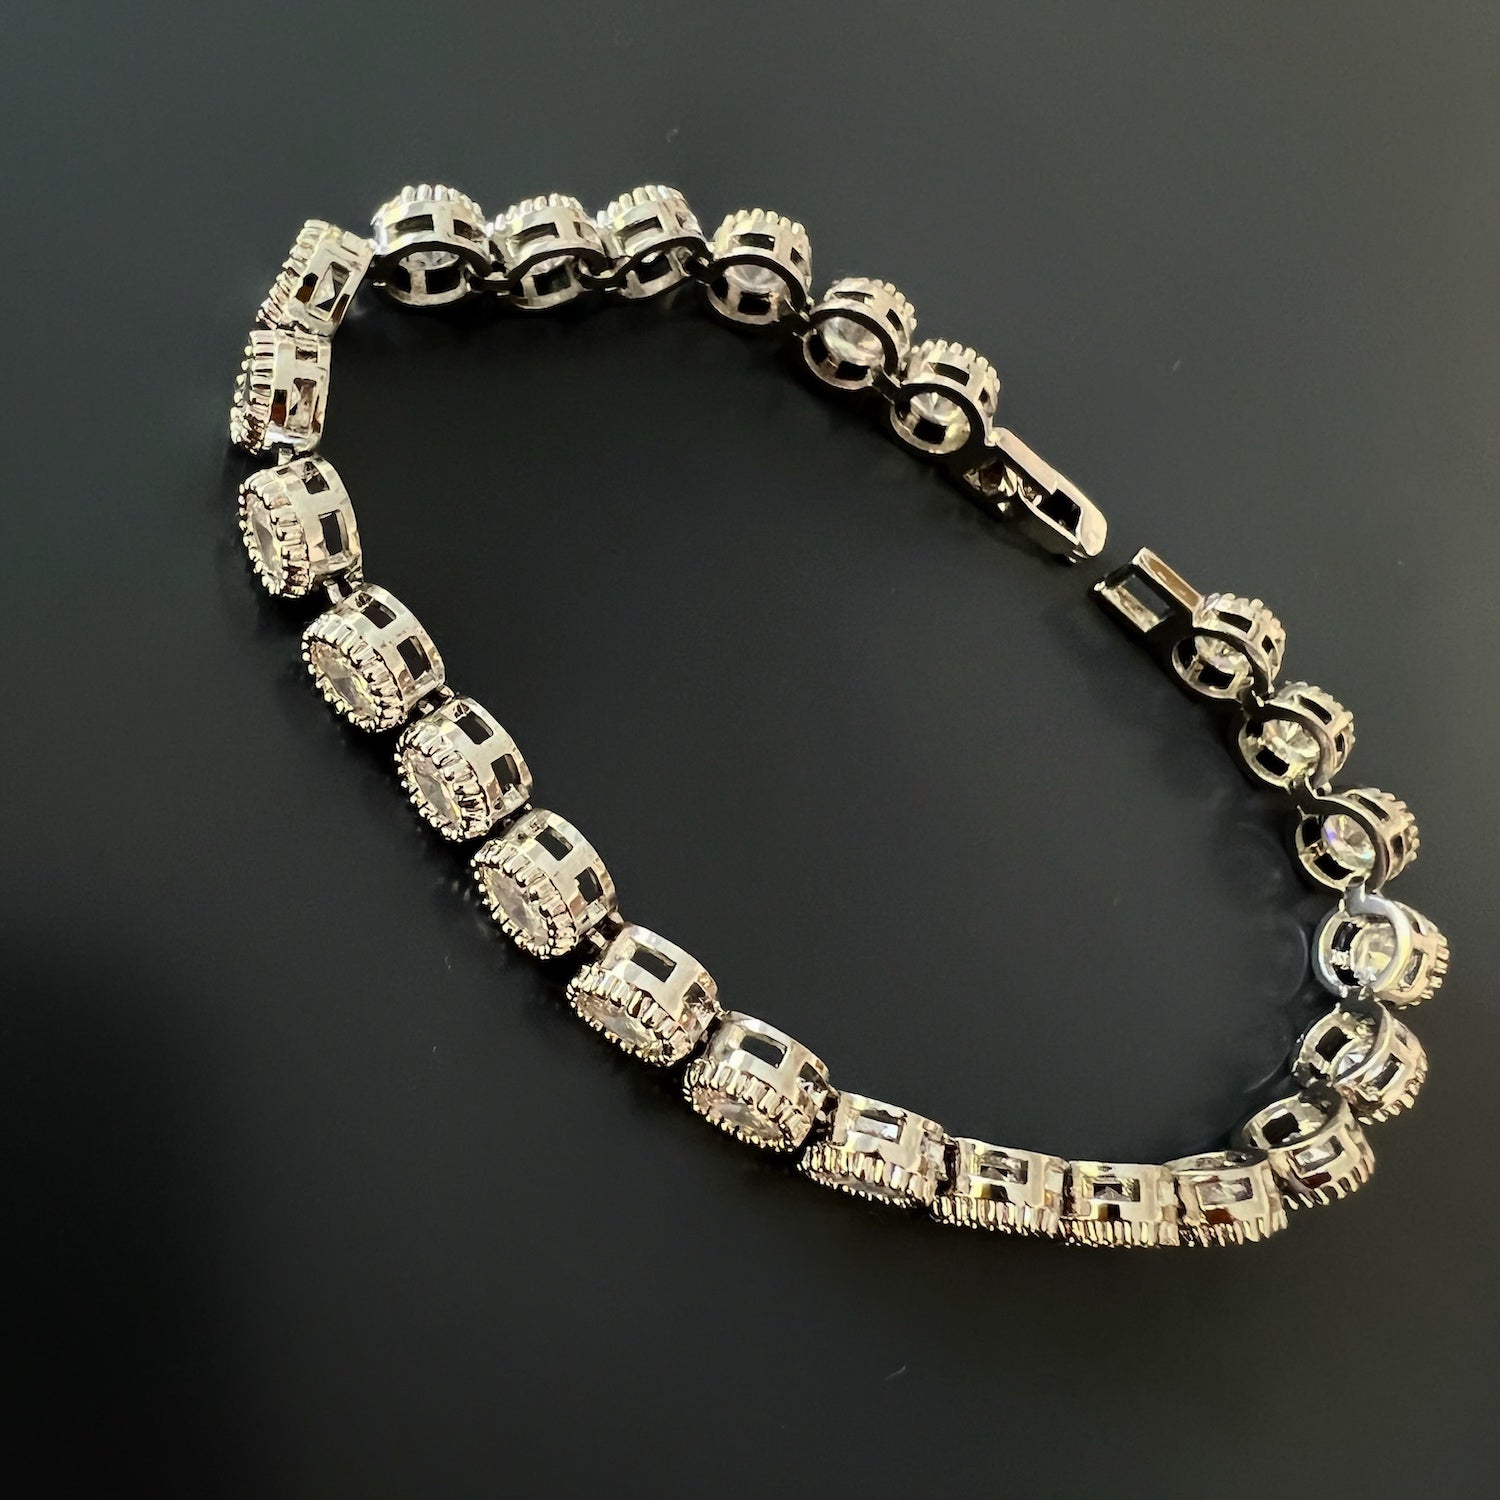 Detailed shot of the secure clasp on the Diamond Tennis Bracelet, ensuring a comfortable and secure fit.